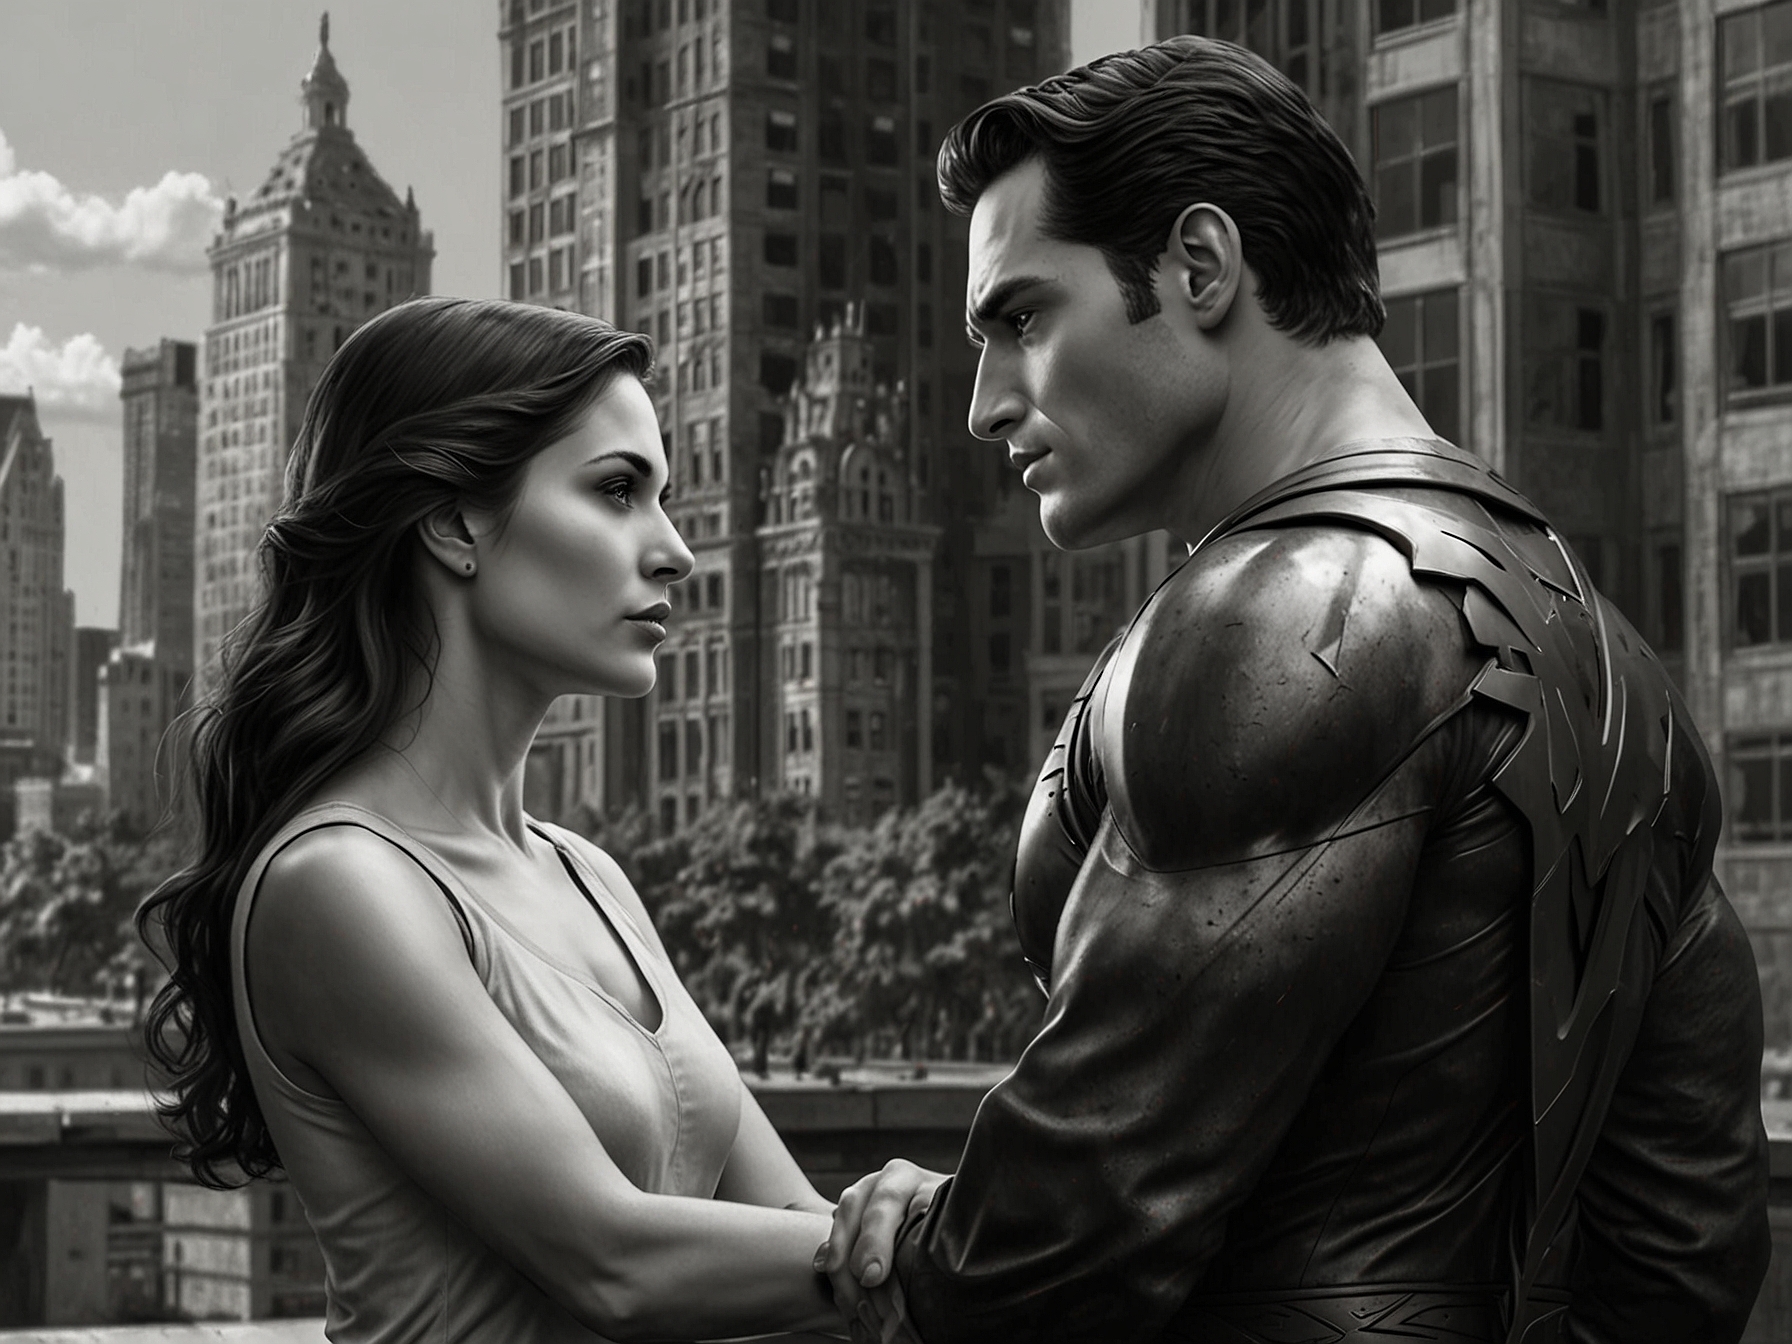 María Gabriela de Faría as The Engineer sharing a tense moment with Superman, set against the urban backdrop of Cleveland's iconic architecture.